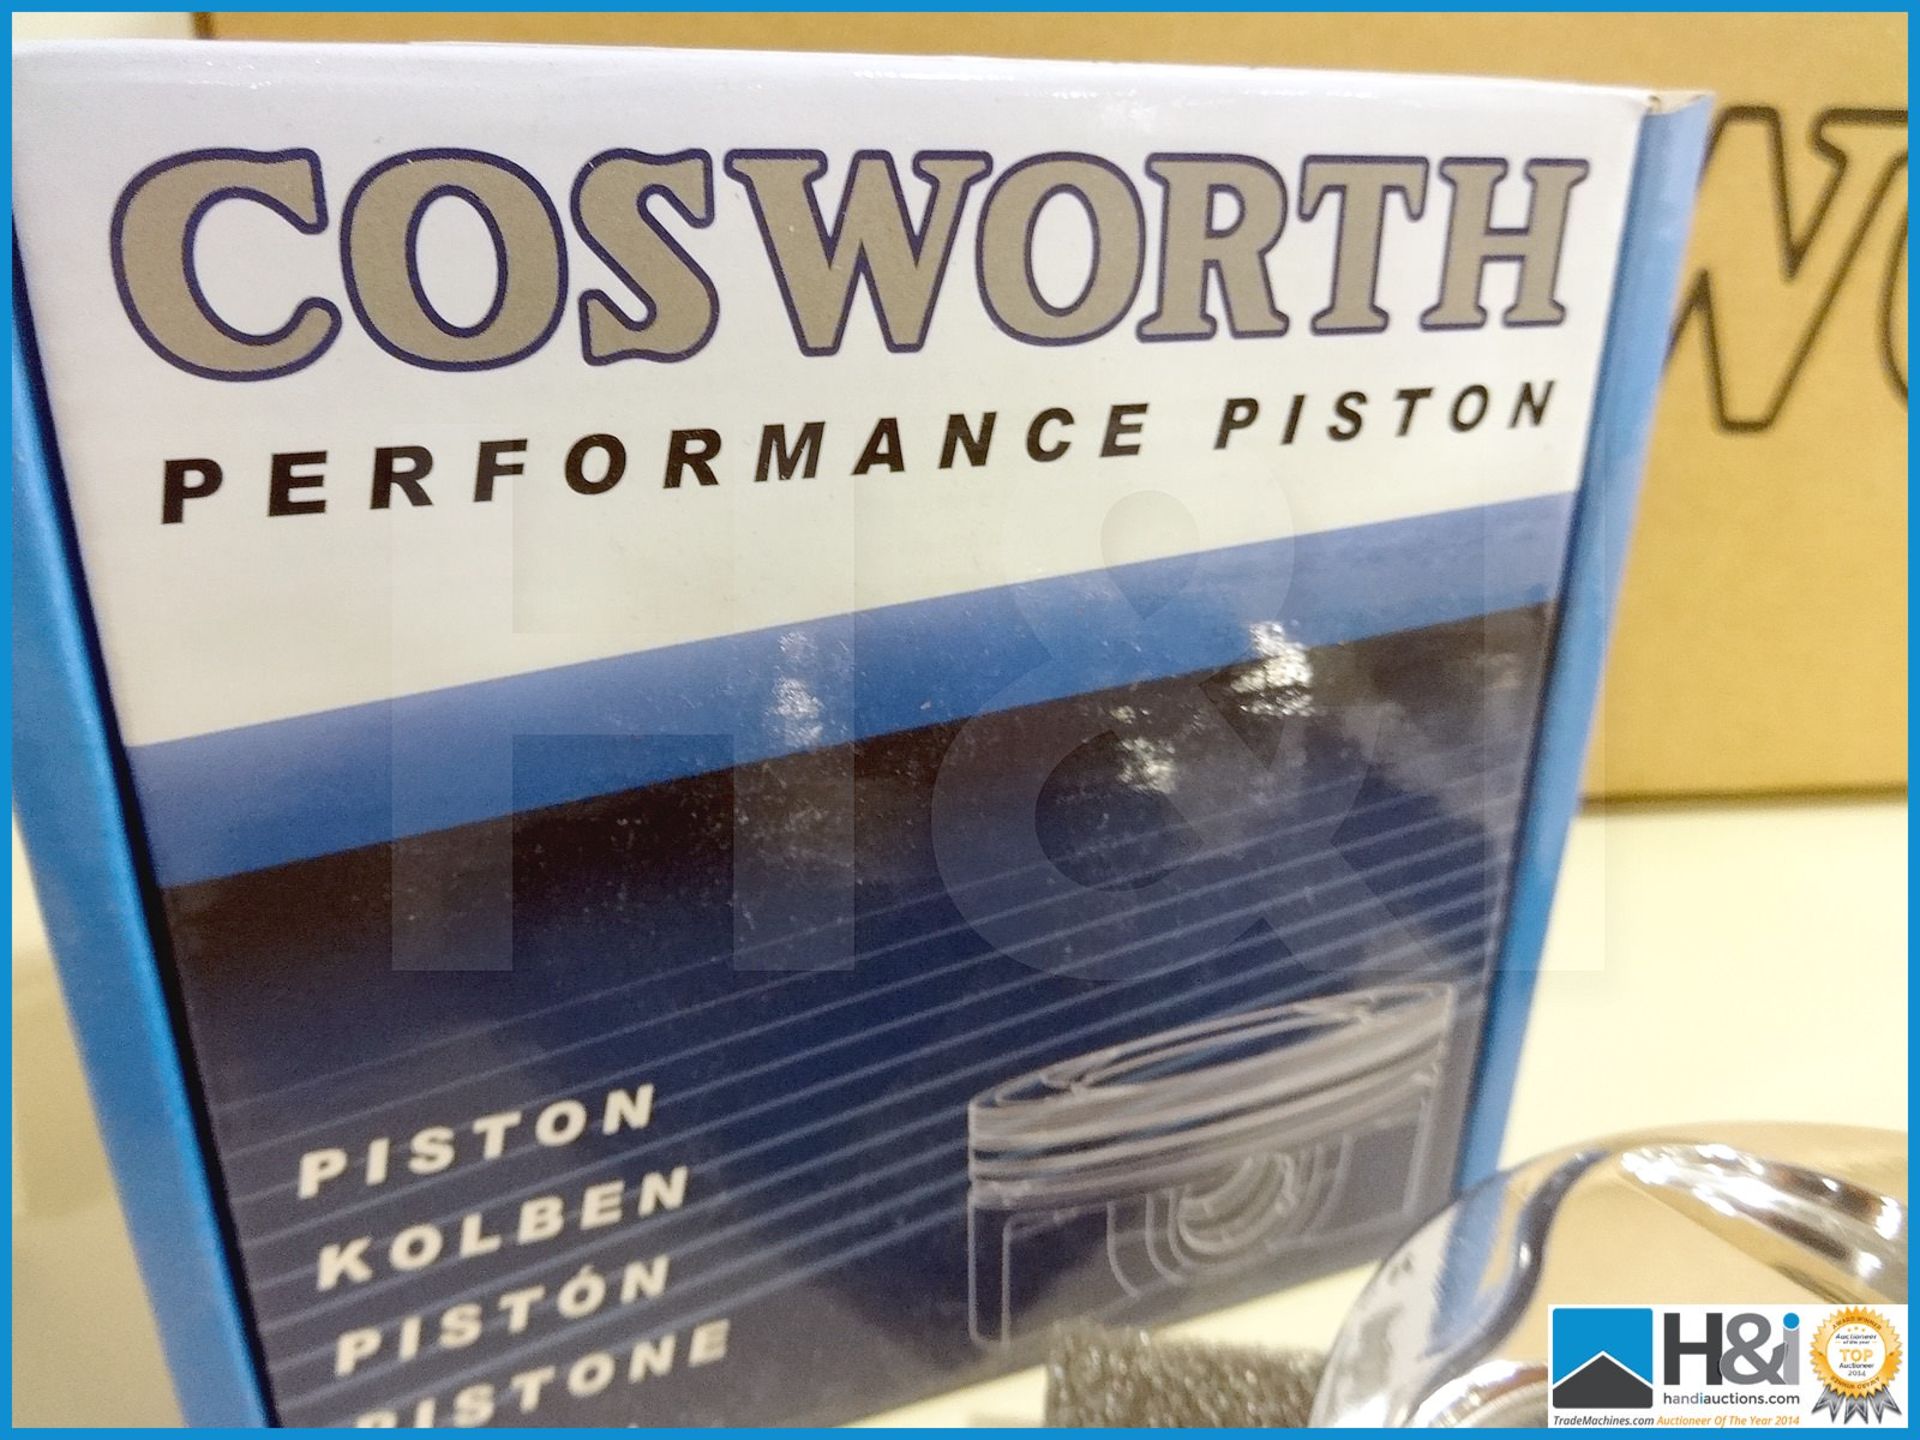 18 off Yamaha WR450 piston kits. 13.0:1 compression. Brand new and boxed. Suggested manufacturers se - Image 3 of 5